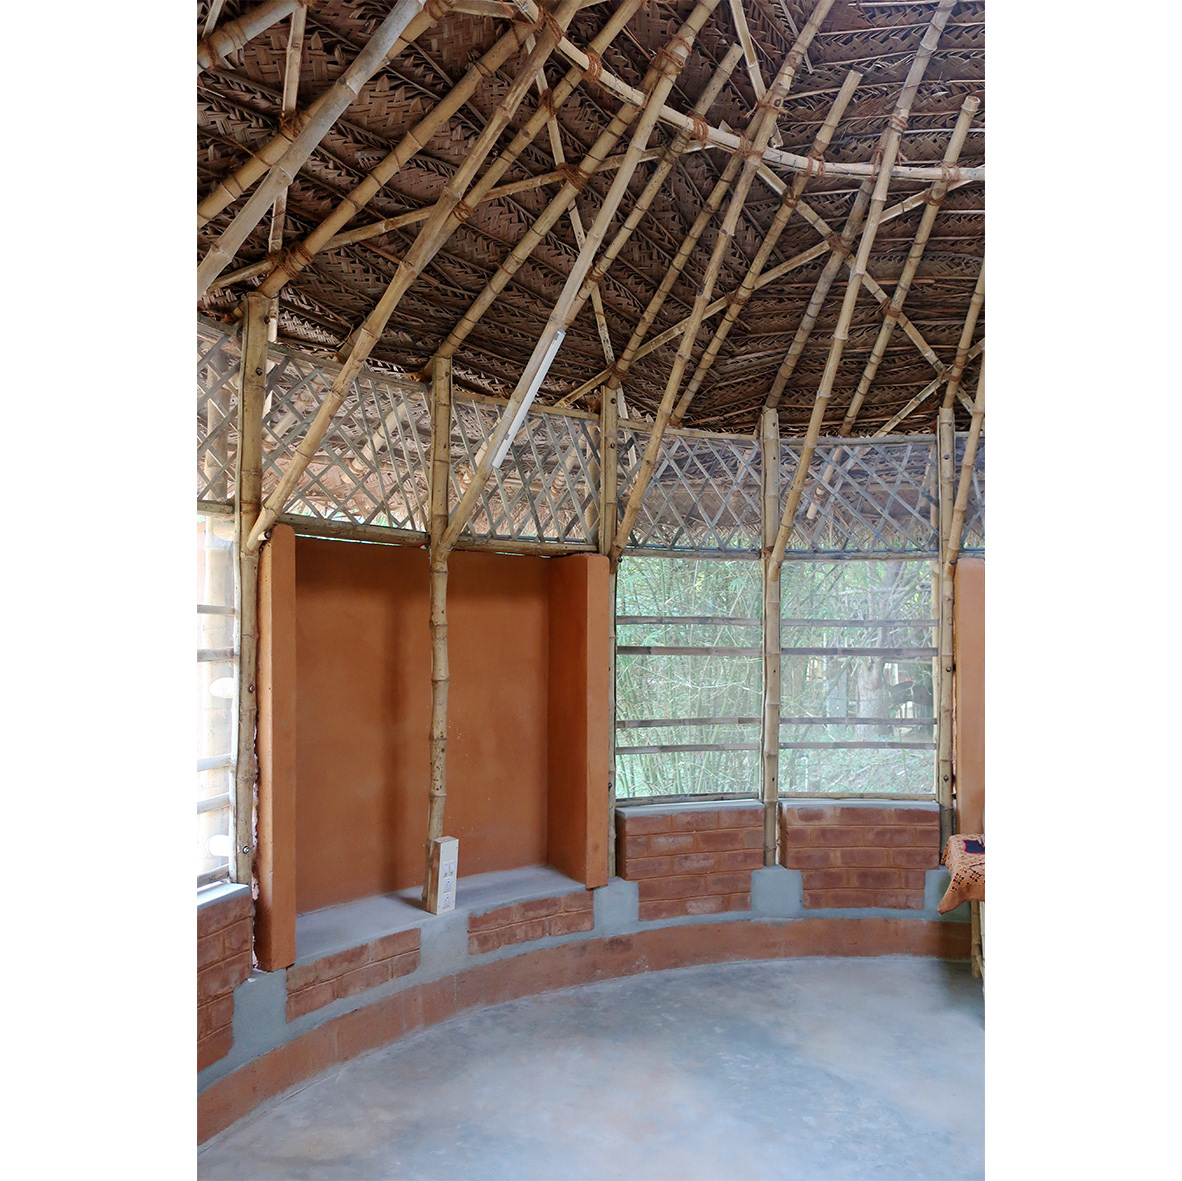 #architecture #bamboo  #Construction #Design #green #interior #sustainable